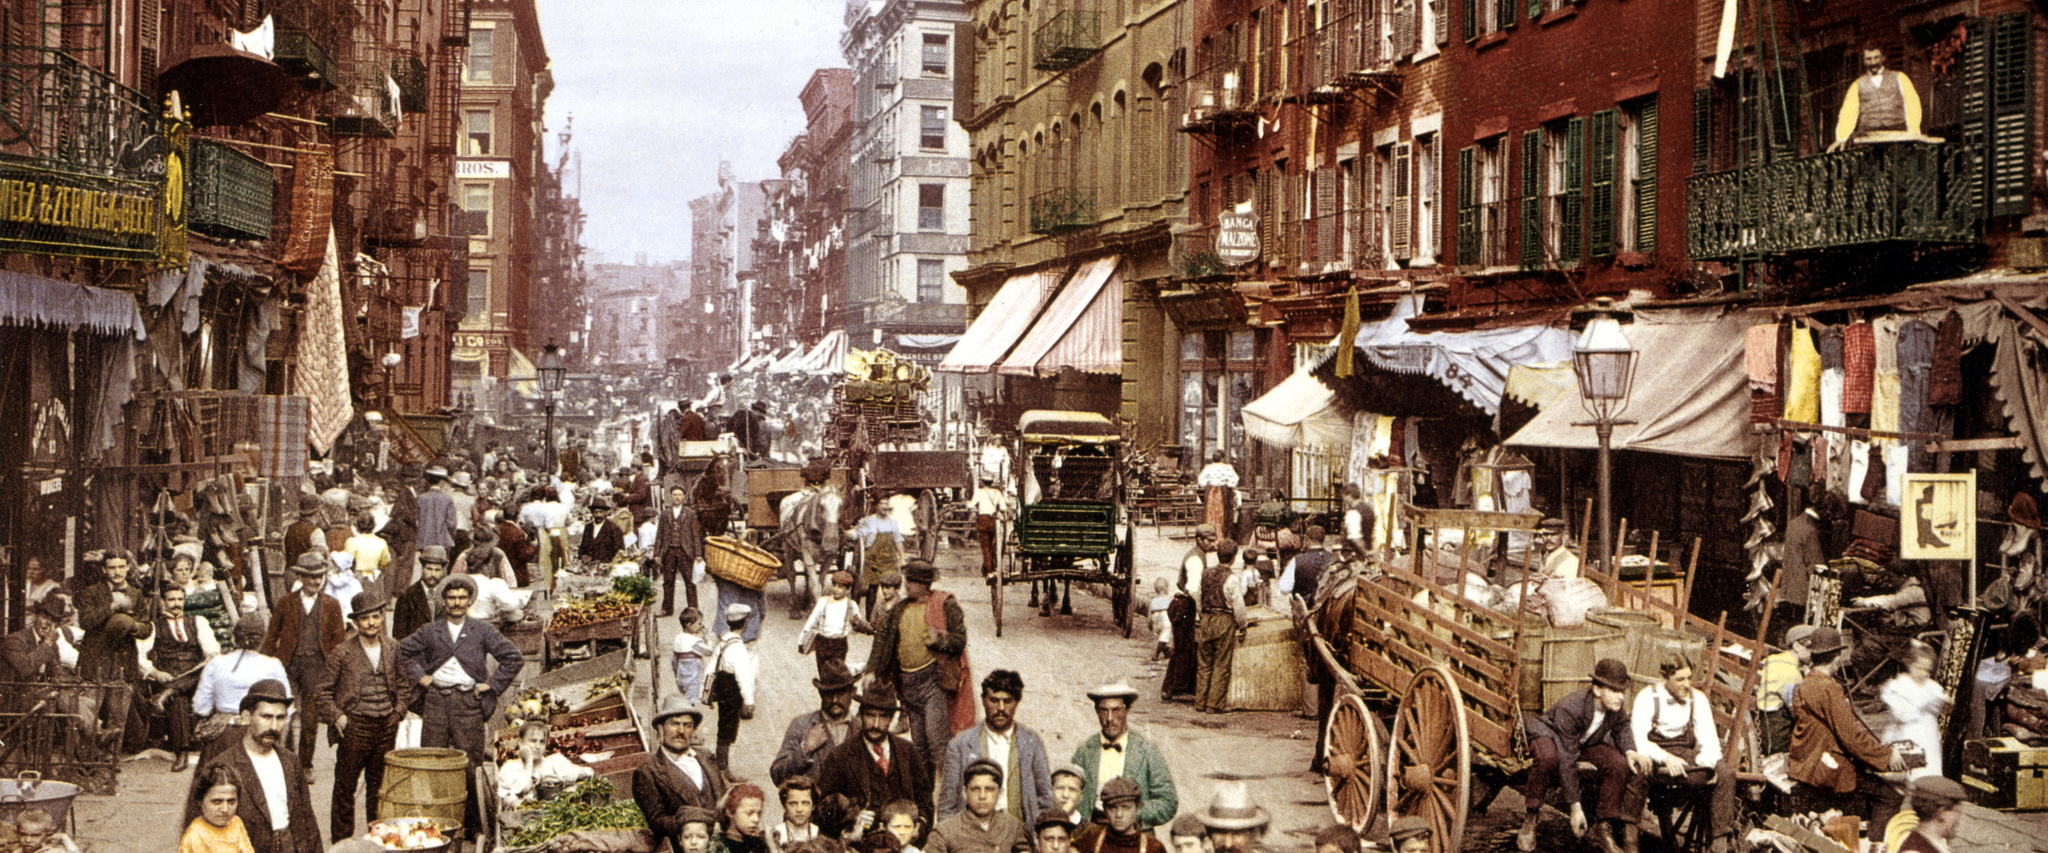 New York’s Mulberry Street in 1900